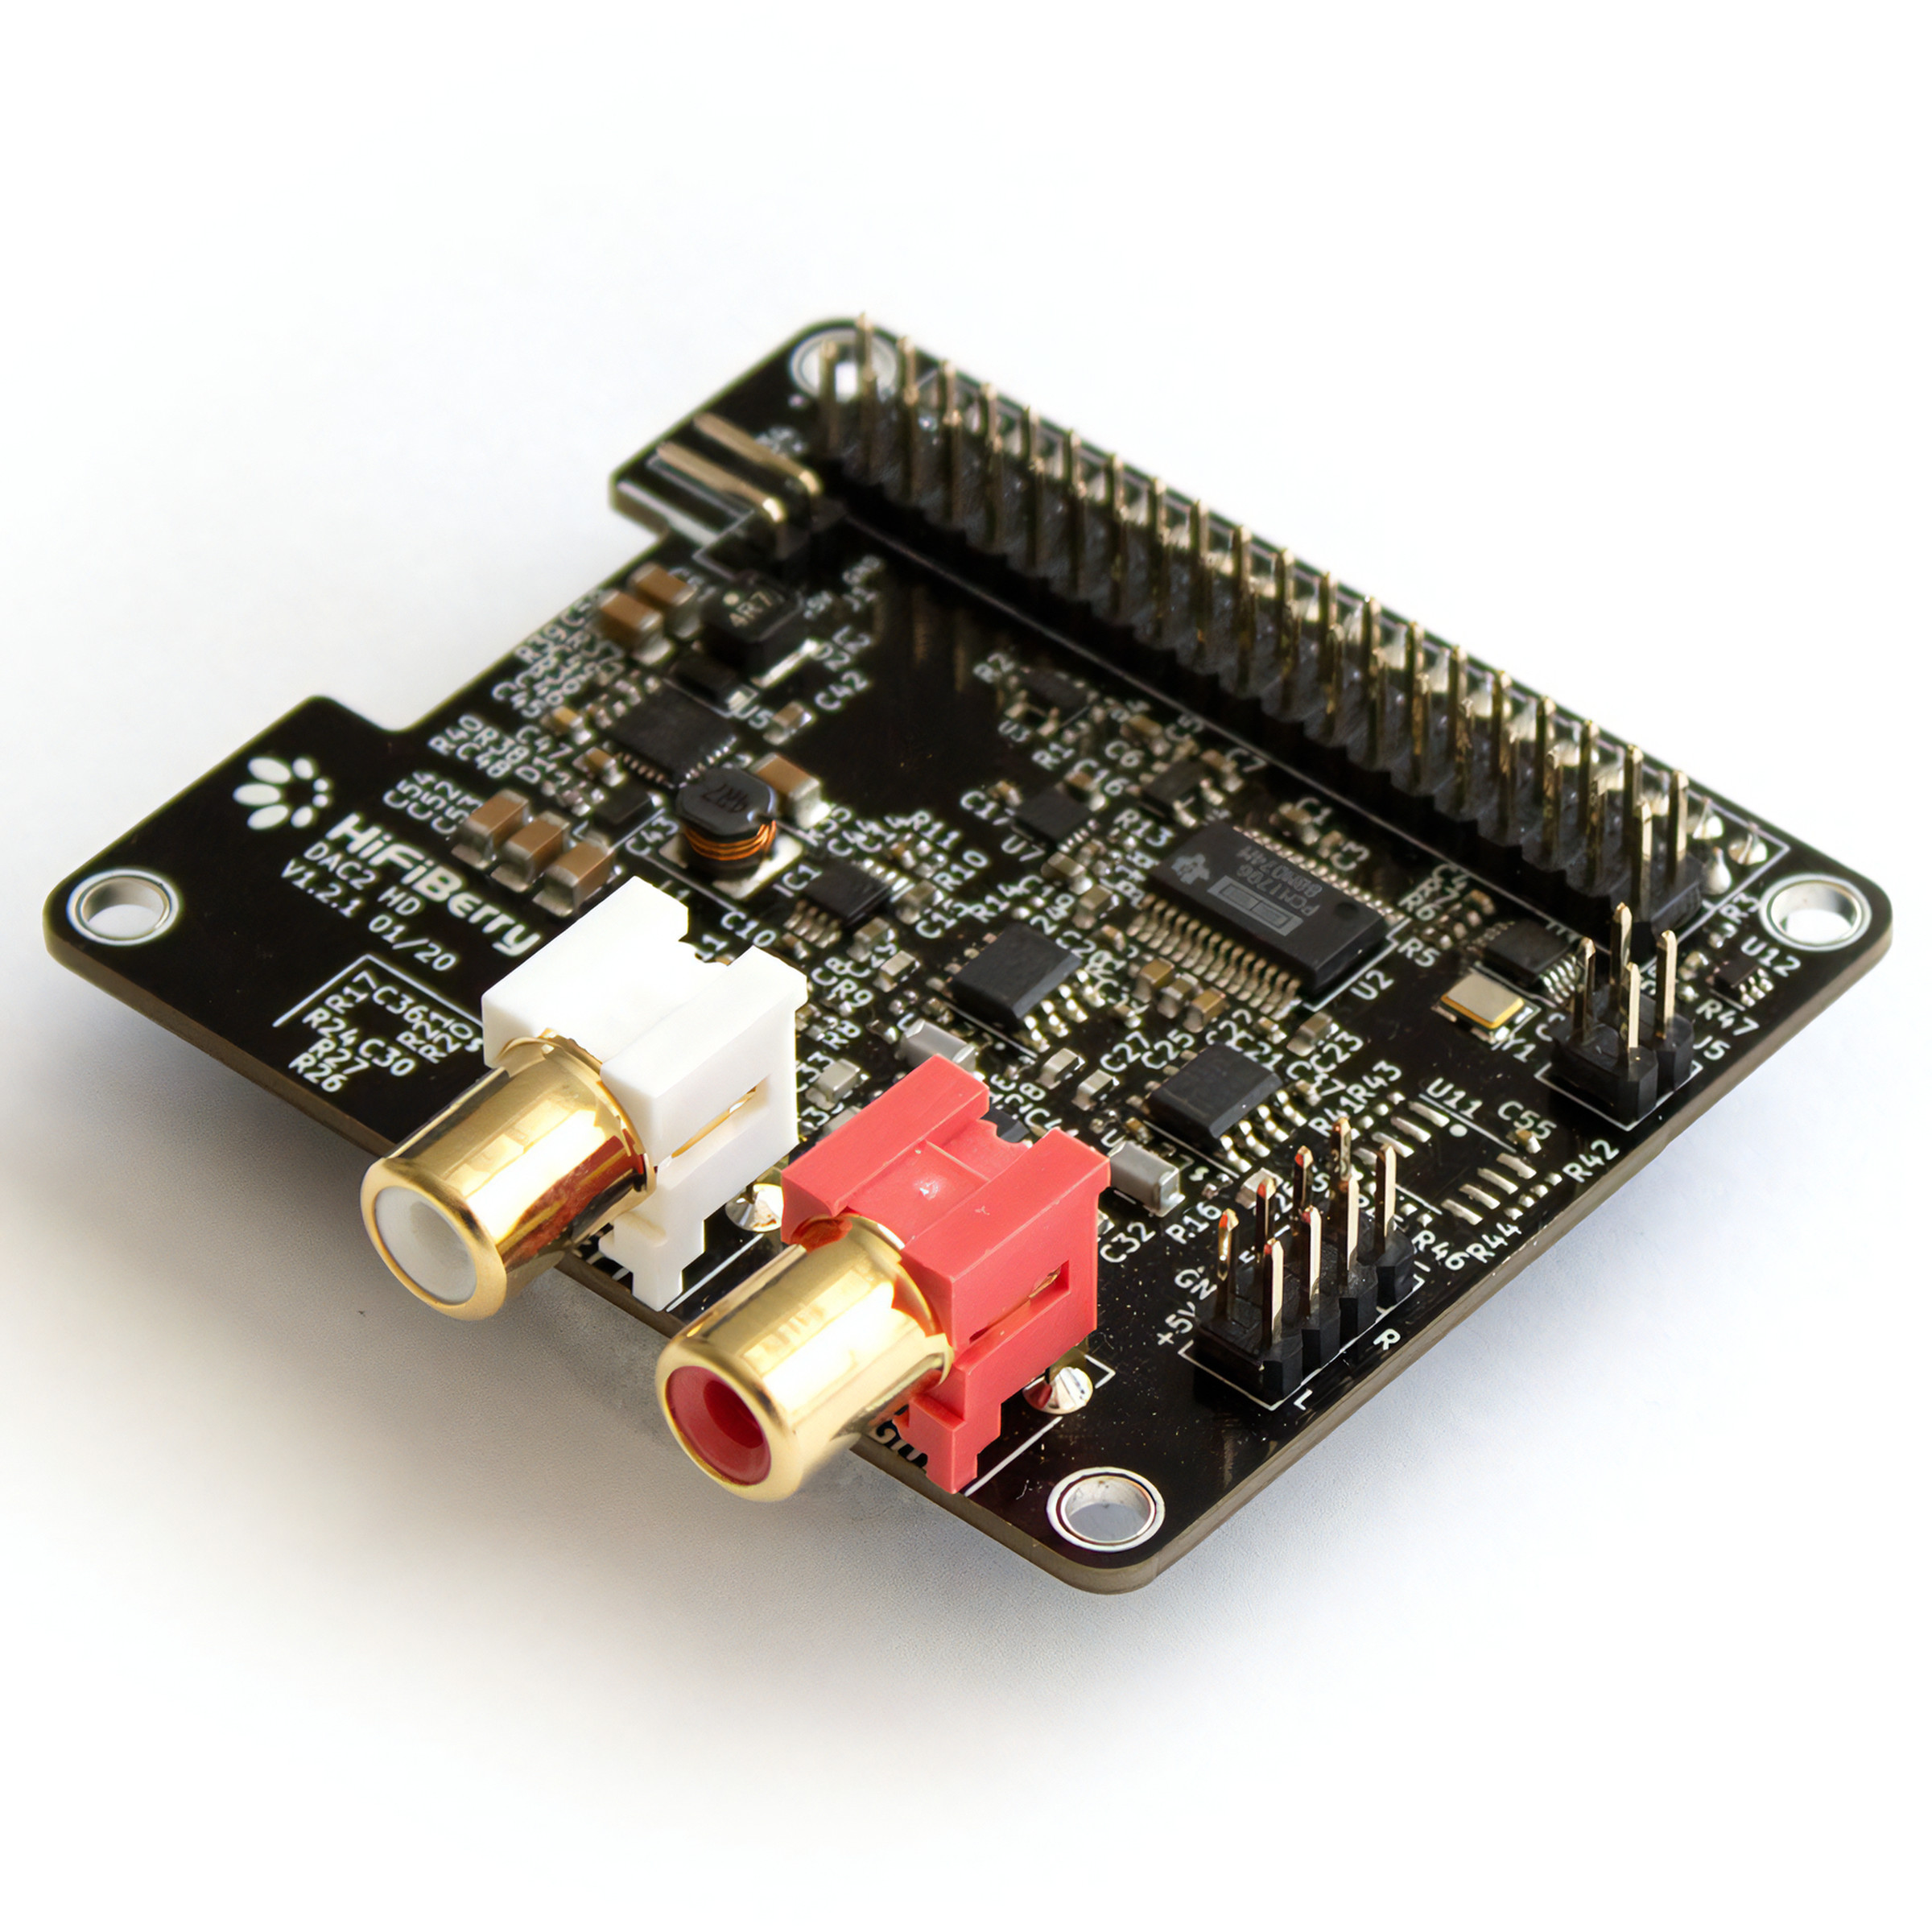 HiFiBerry and other companies make these nice DAC Hats to turn a Pi into a network streamer